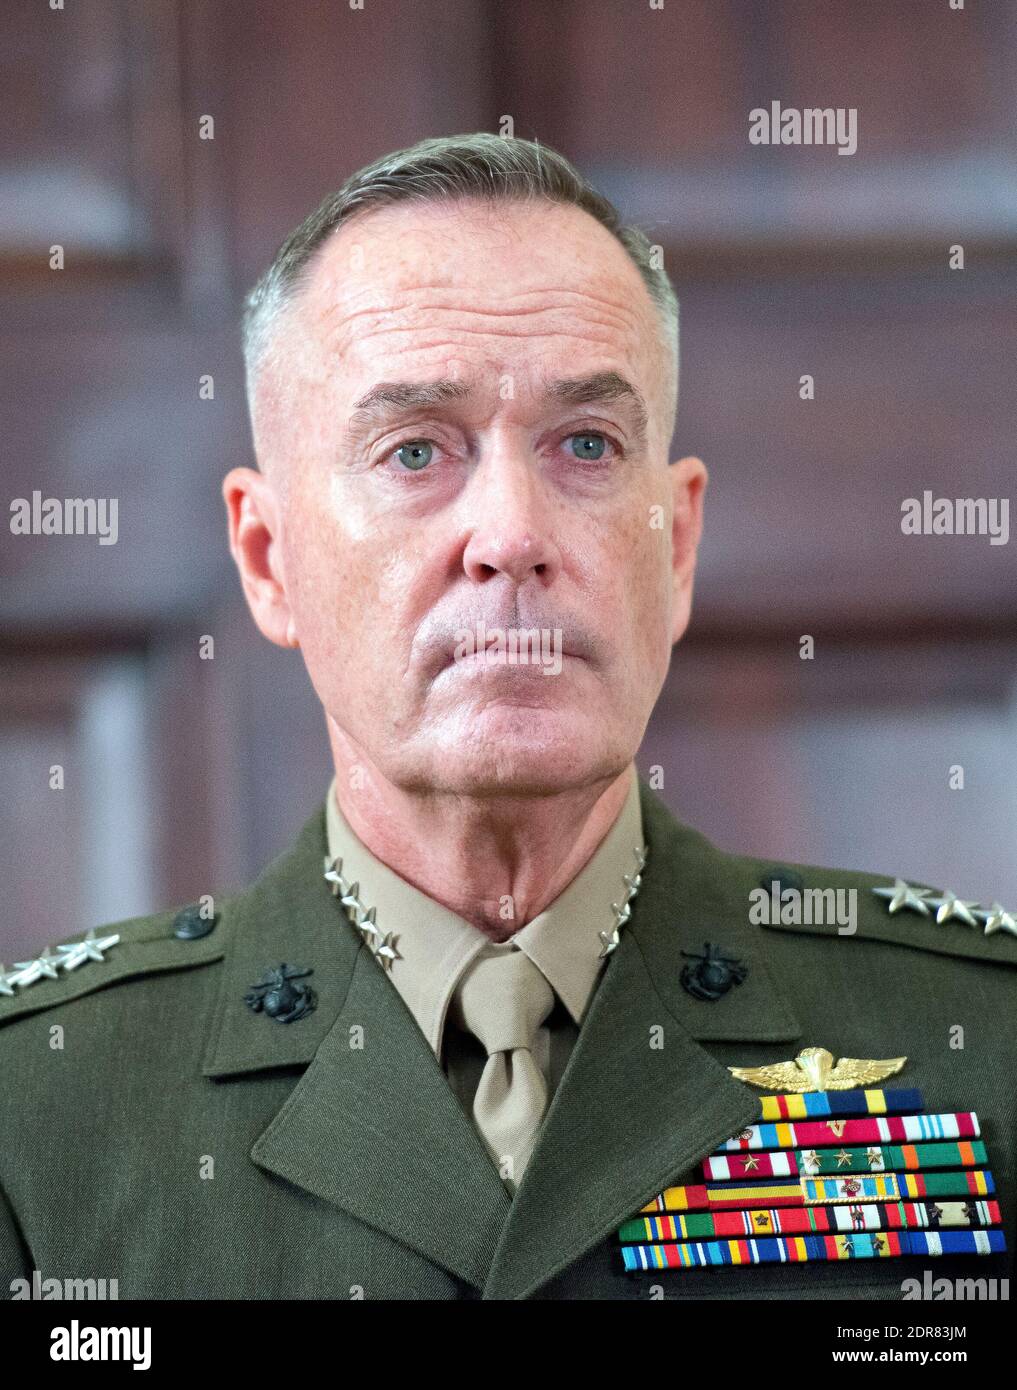 United States Marine Corps General Joseph F. Dunford, Chairman, Joint Chiefs of Staff, looks on as US President Barack Obama announces he will keep 5,500 US troops in Afghanistan when he leaves office in 2017 and explains his reasoning for that action in the Roosevelt Room of the White House in Washington, DC, USA, on Thursday, October 15, 2015. Photo by Ron Sachs/Pool/ABACAPRESS.COM Stock Photo